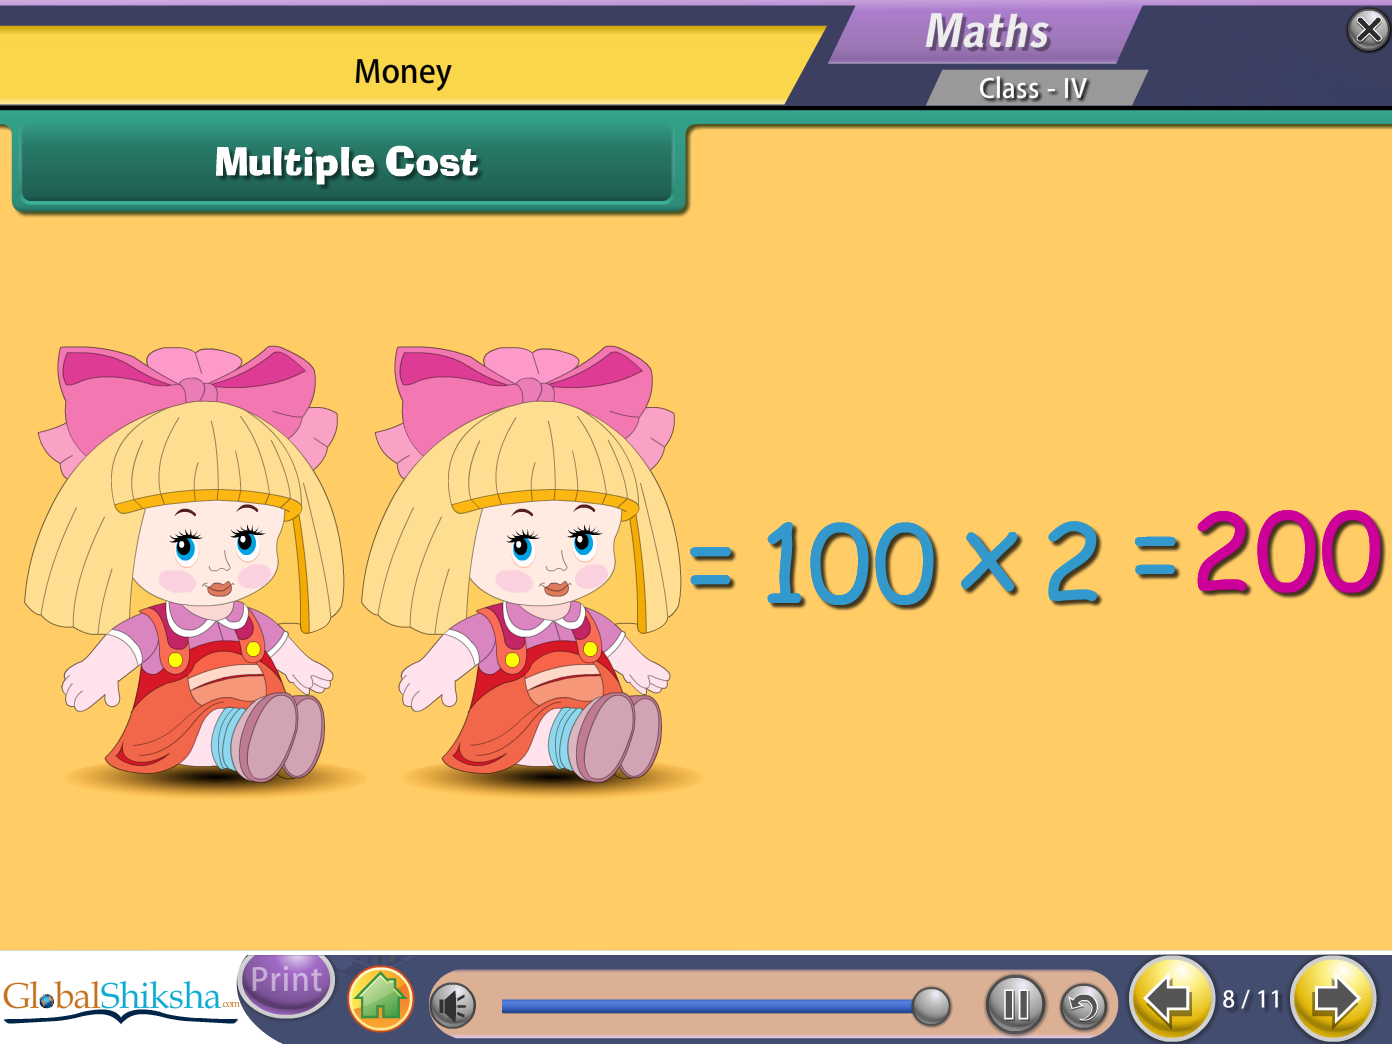 CBSE Class 4 Maths & Science Animated Pendrive in English